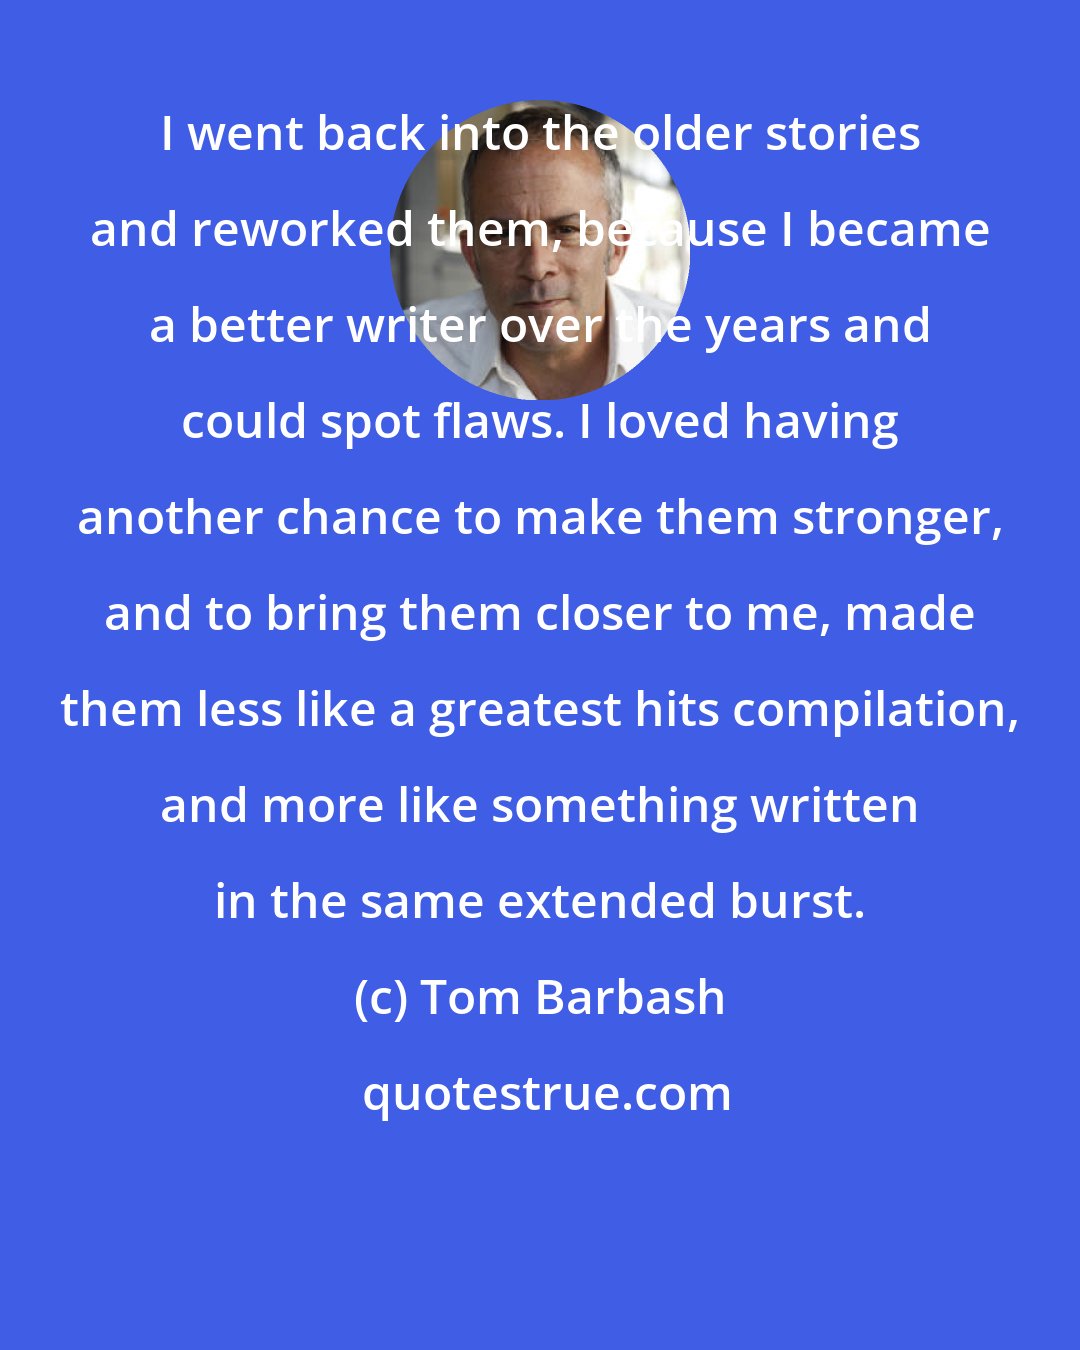 Tom Barbash: I went back into the older stories and reworked them, because I became a better writer over the years and could spot flaws. I loved having another chance to make them stronger, and to bring them closer to me, made them less like a greatest hits compilation, and more like something written in the same extended burst.